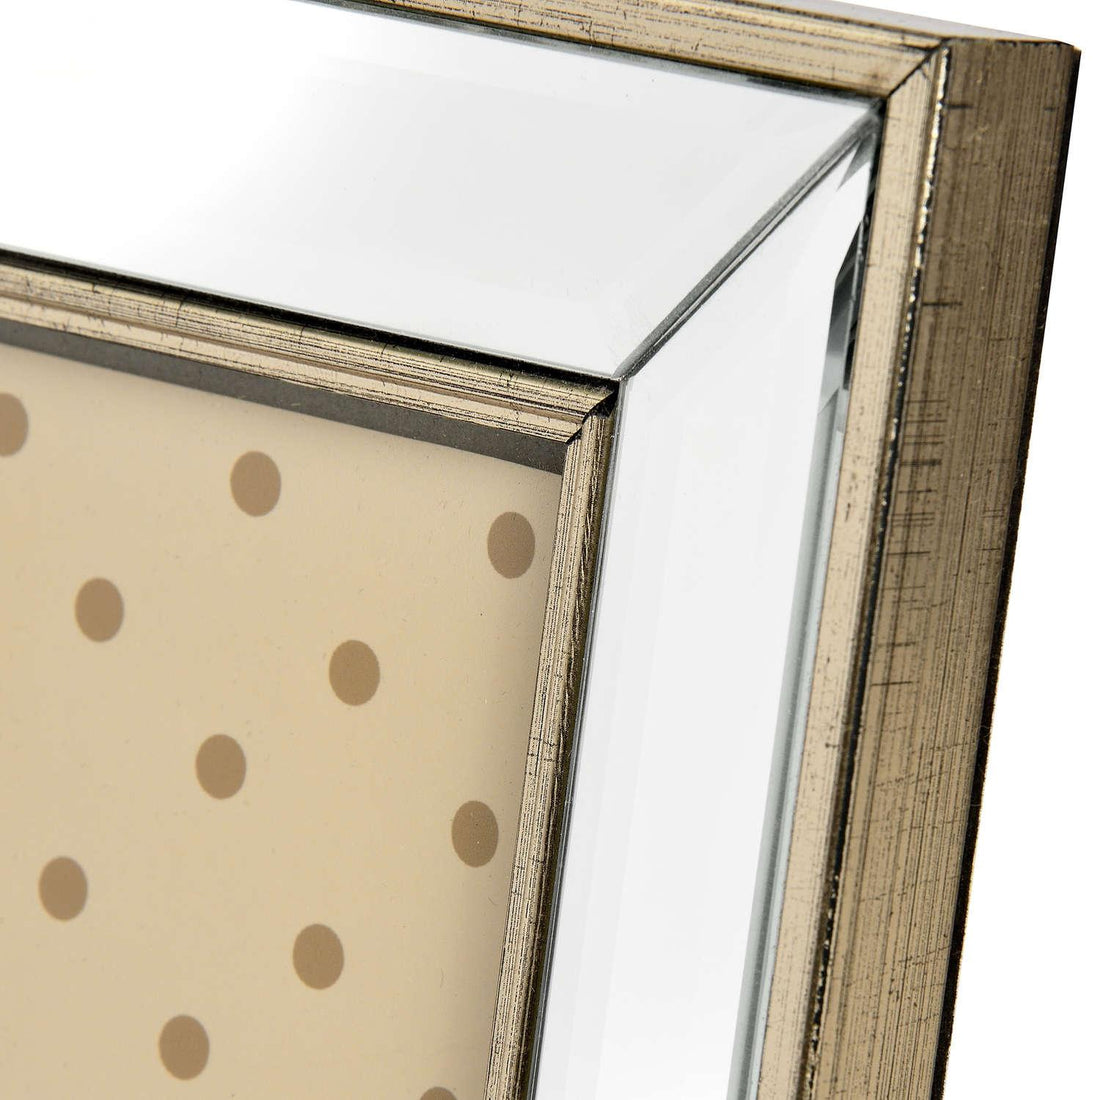 Rectangle Mirror Bordered Photo Frame 5x7 - £28.95 - Gifts & Accessories > Photo Frames > Single Photo Frames 